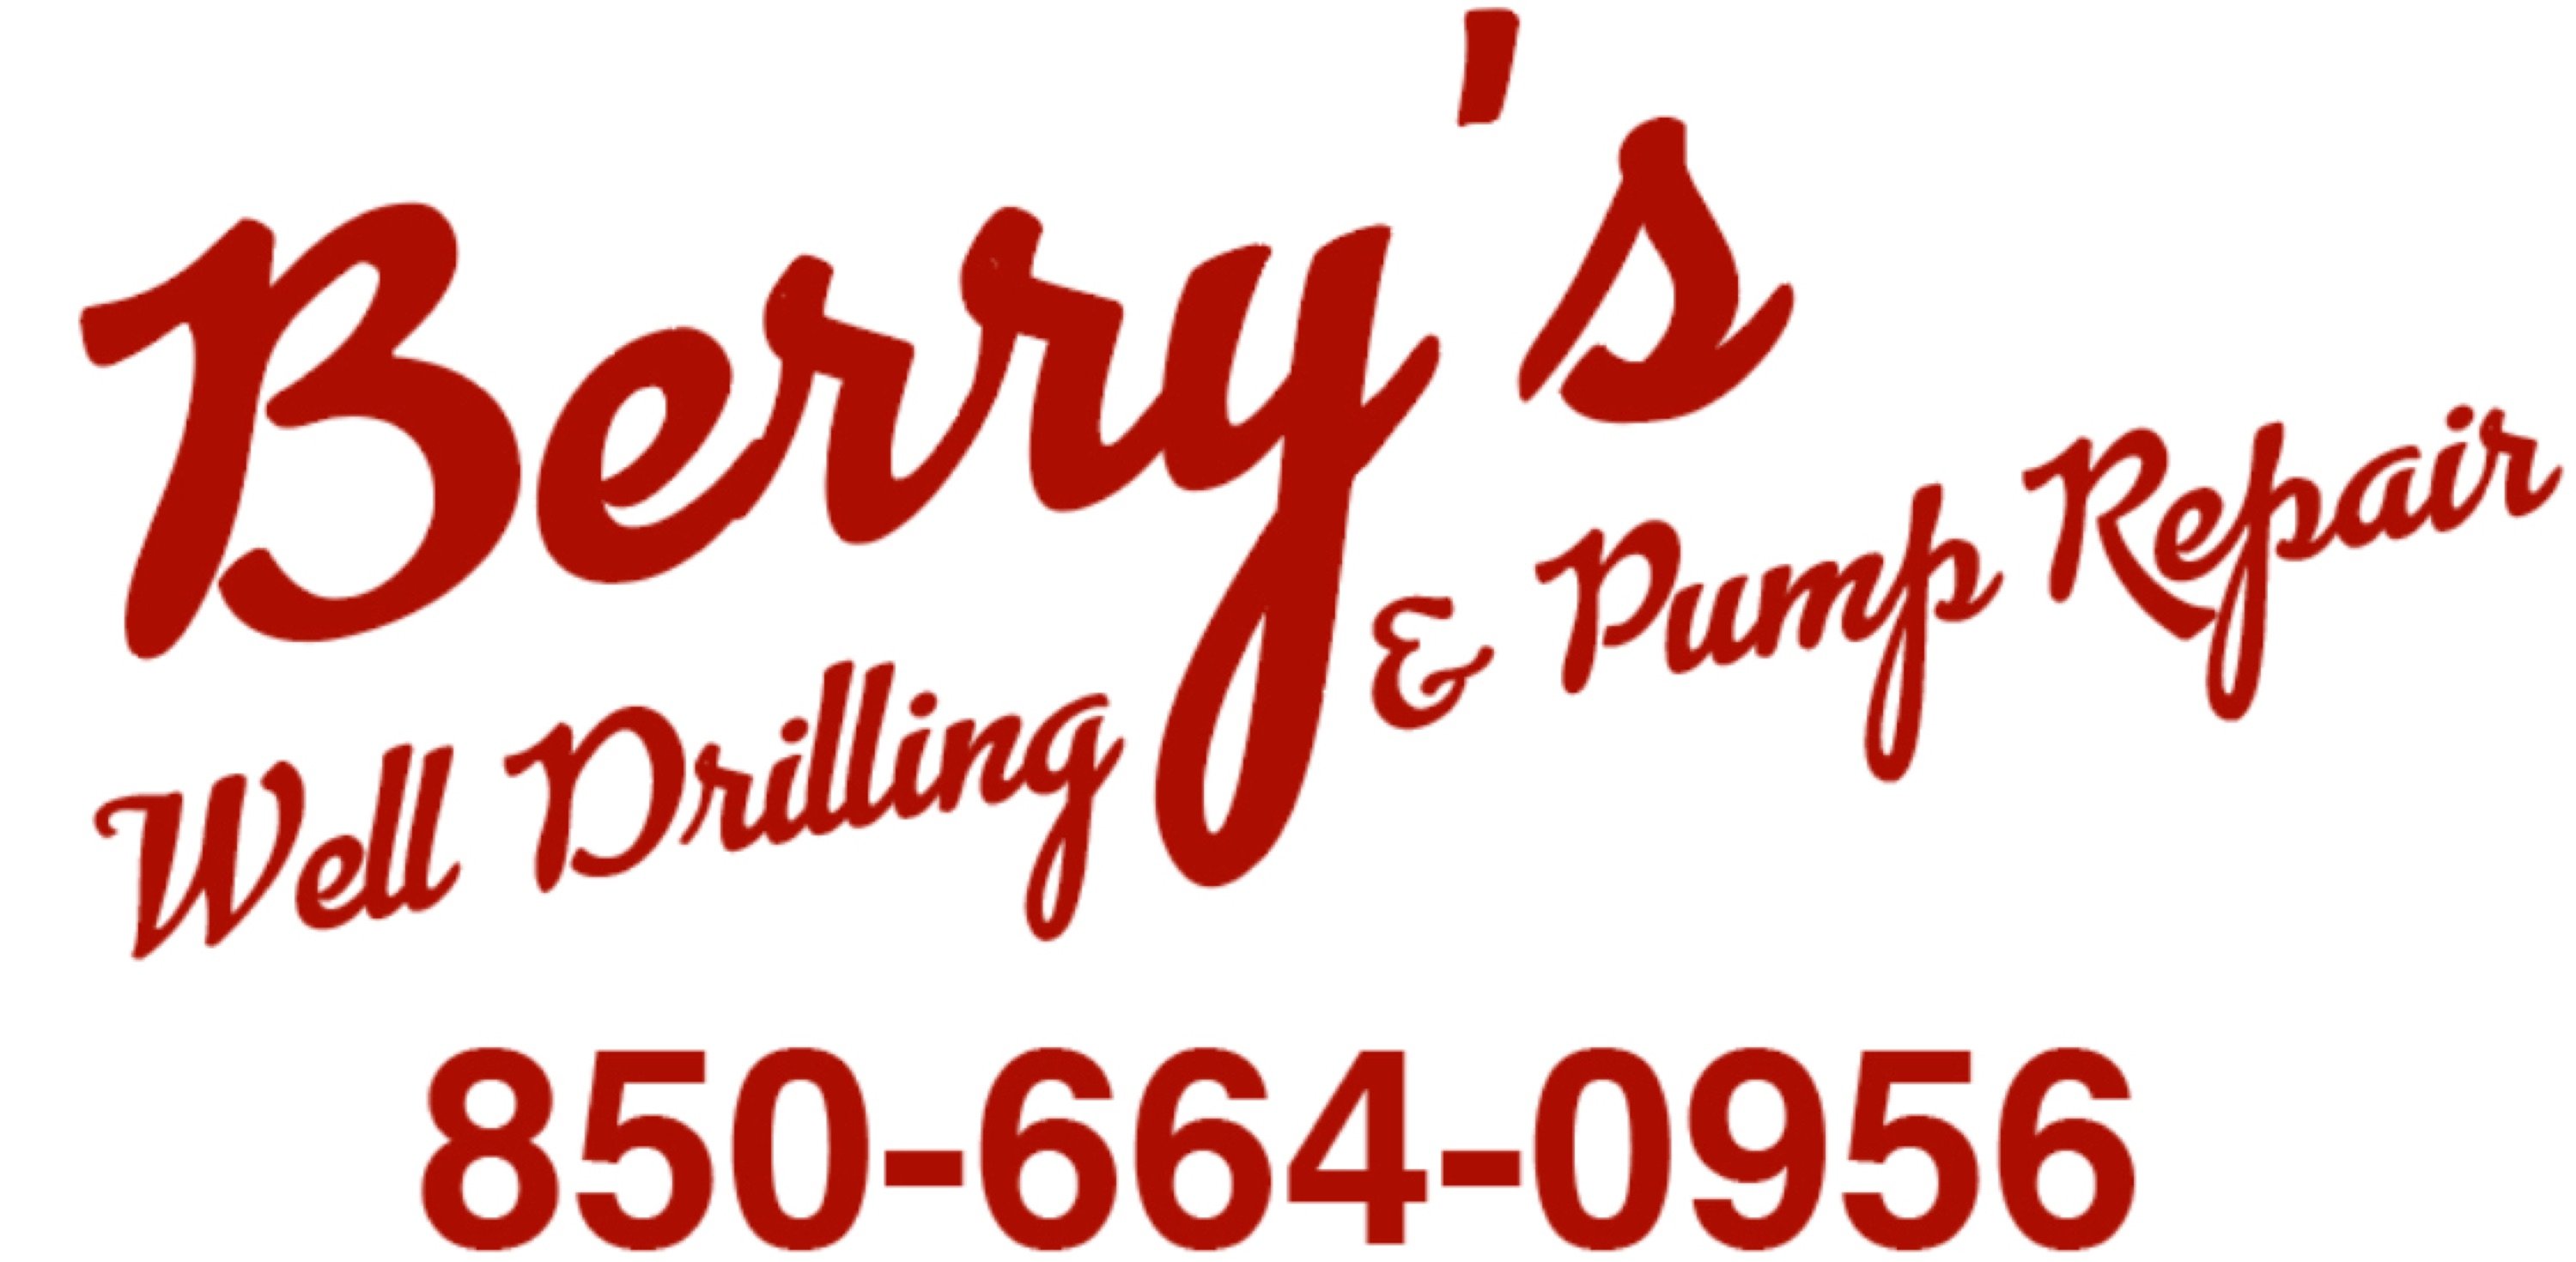 Berry's Well Drilling, Inc. Logo